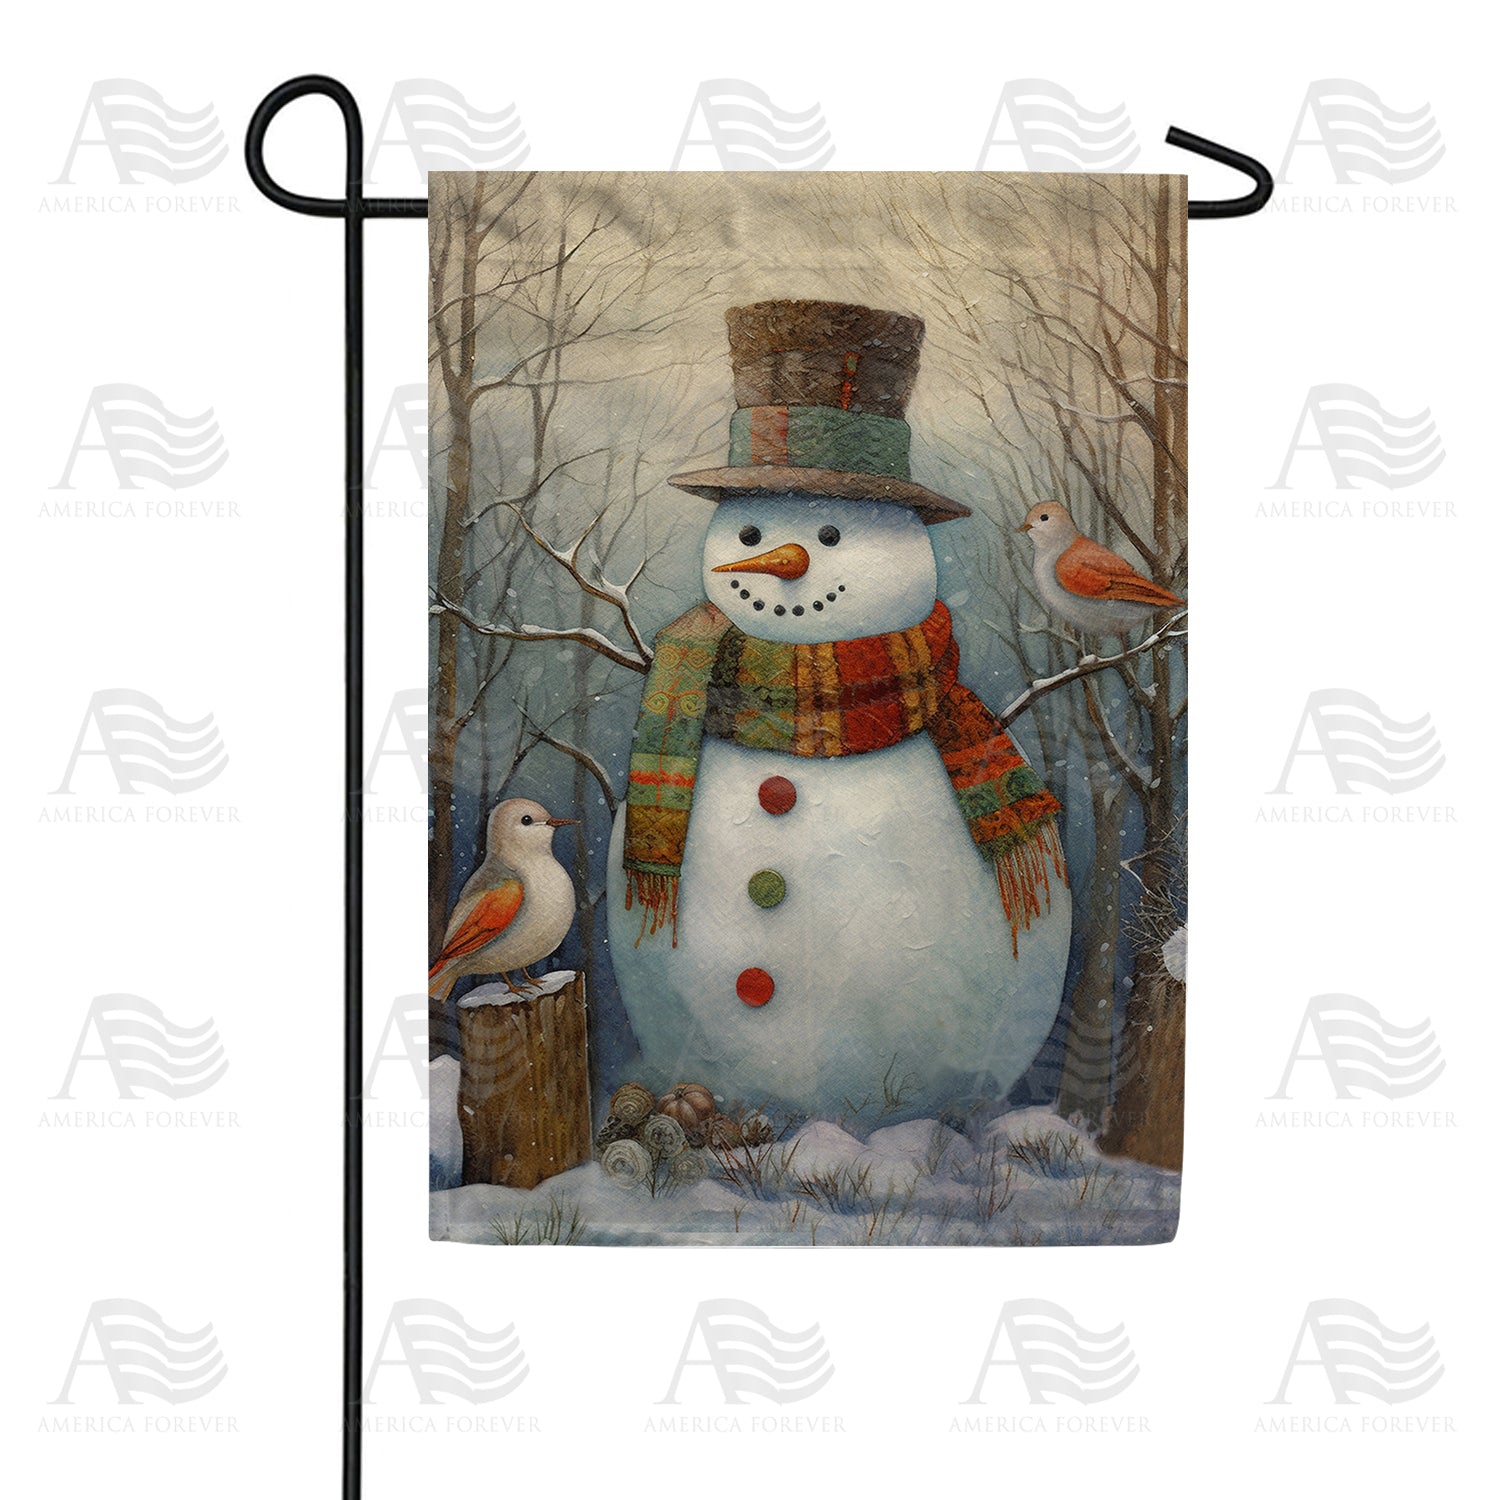 Plaid Clothed Snowman Double Sided Garden Flag